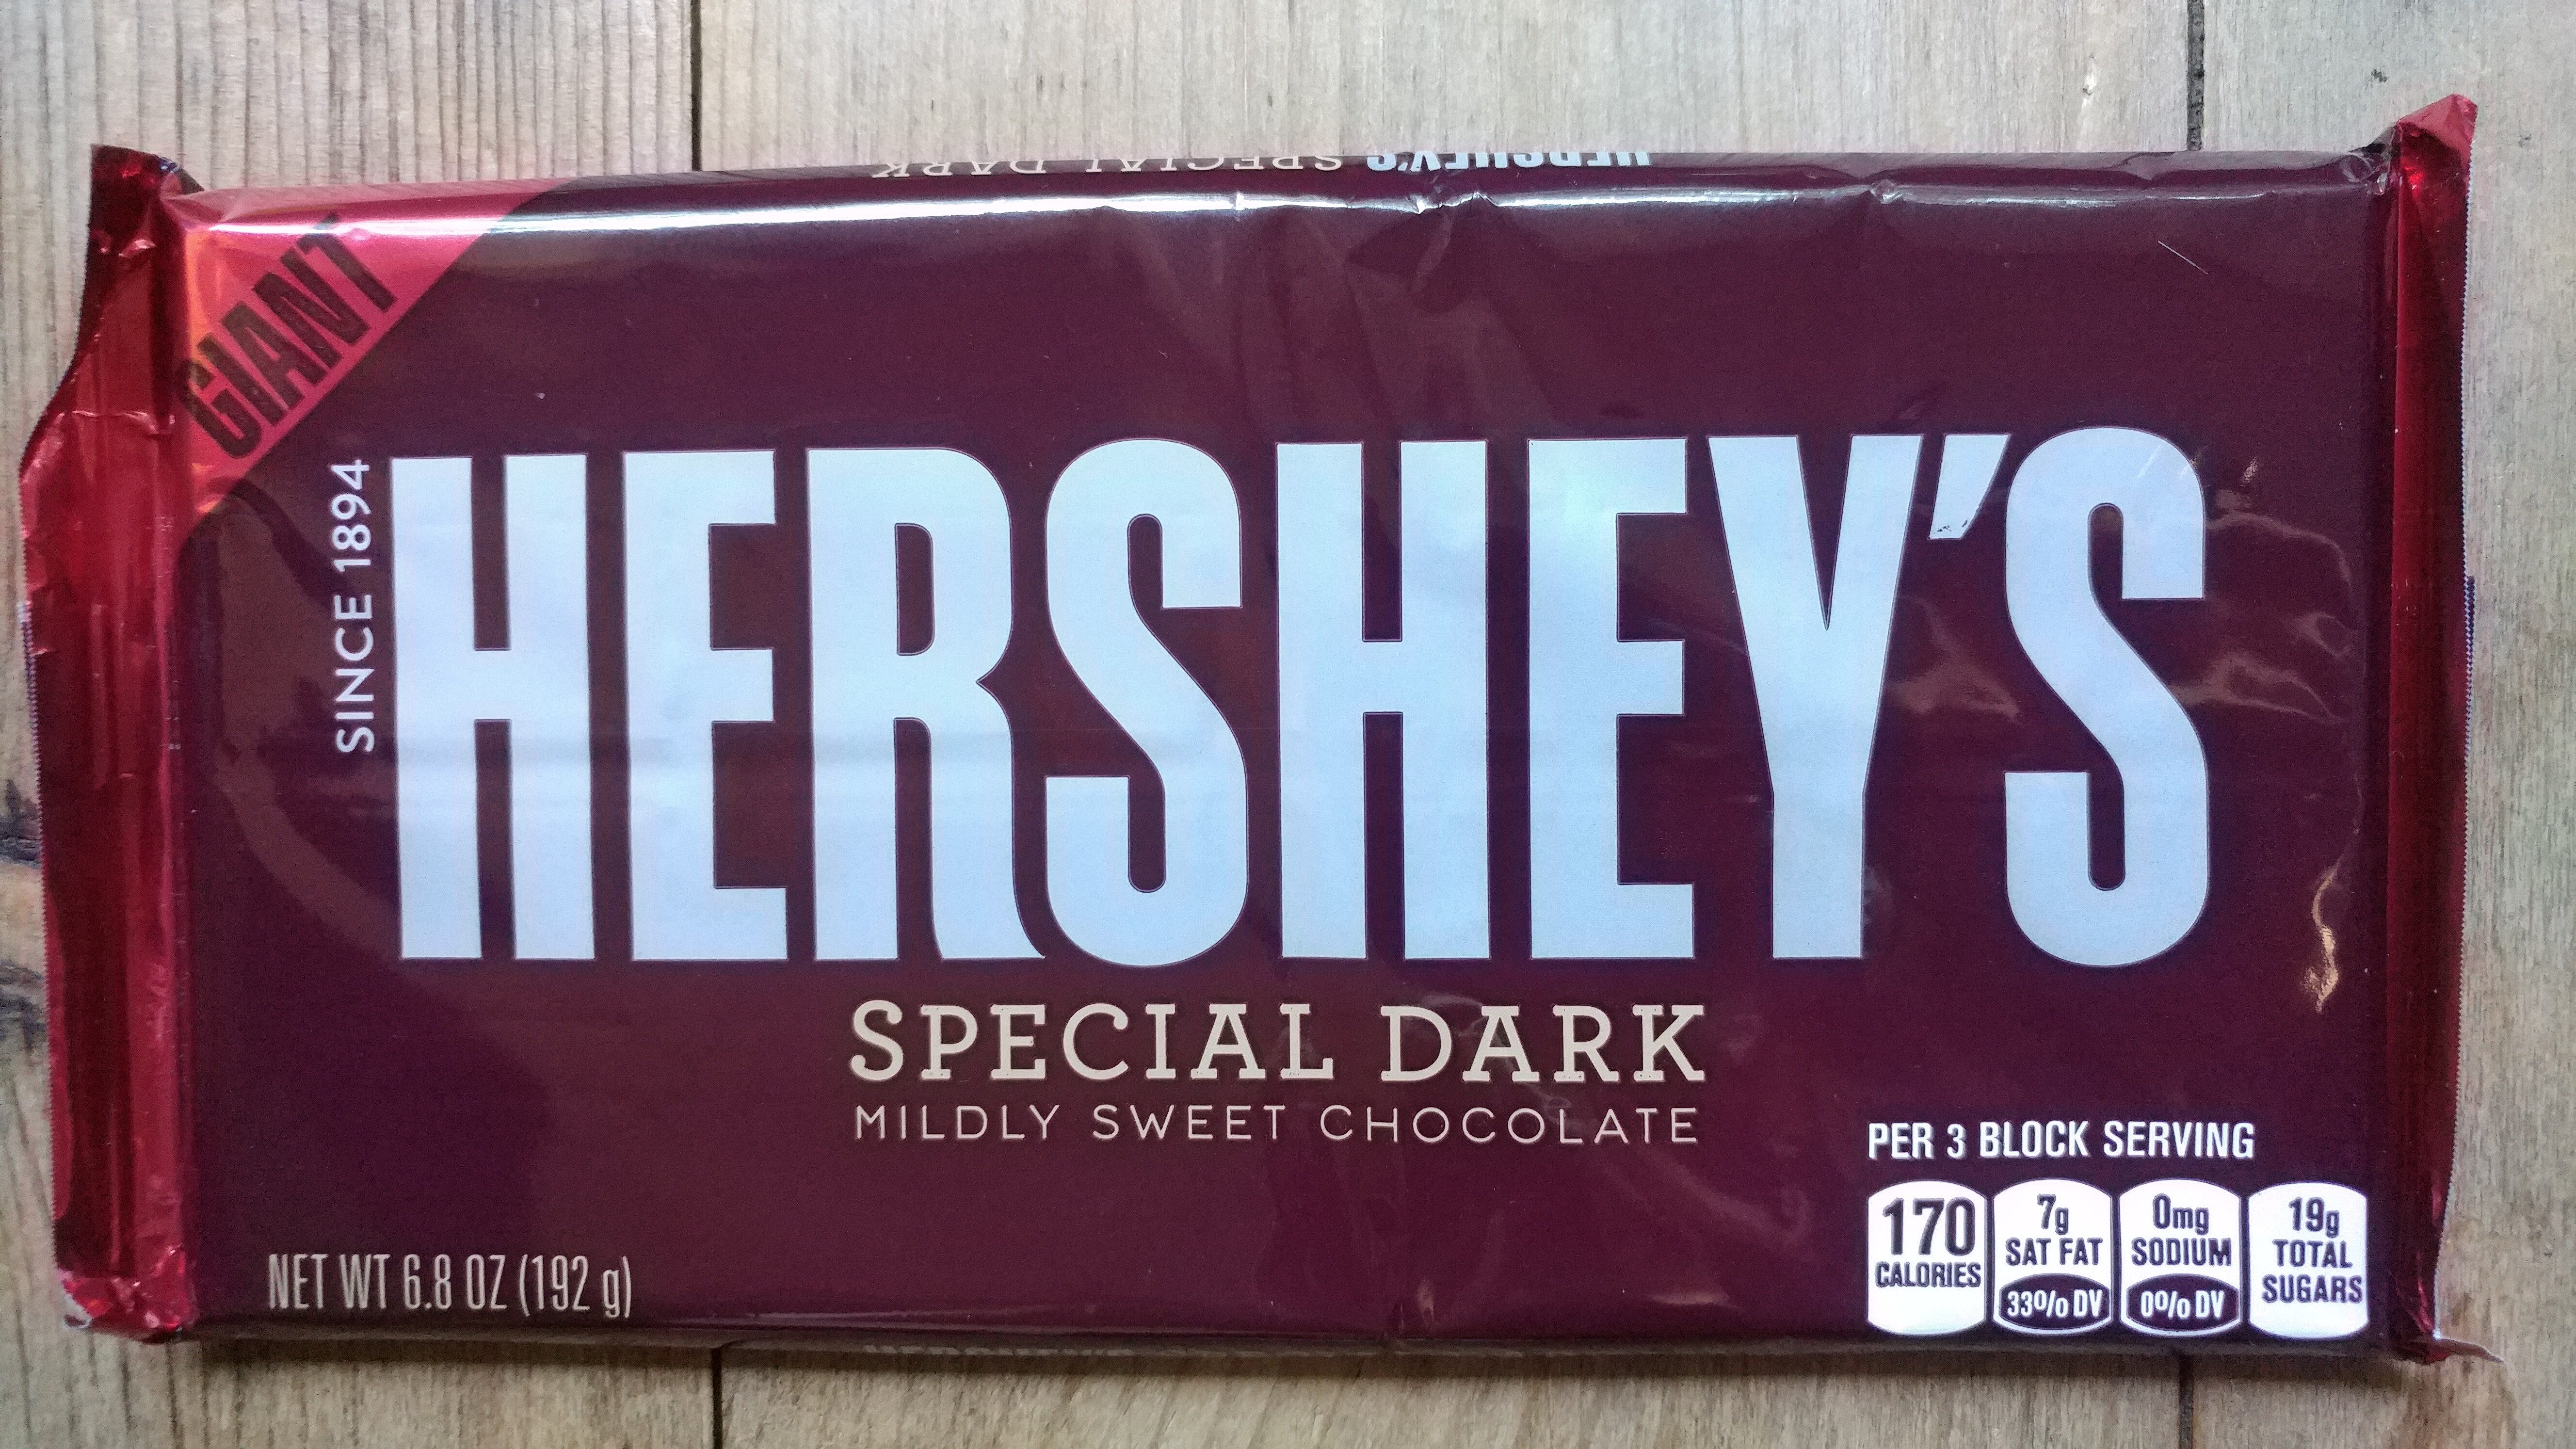 Special Dark - Mildly Sweet Chocolate (Giant Bar) - Product